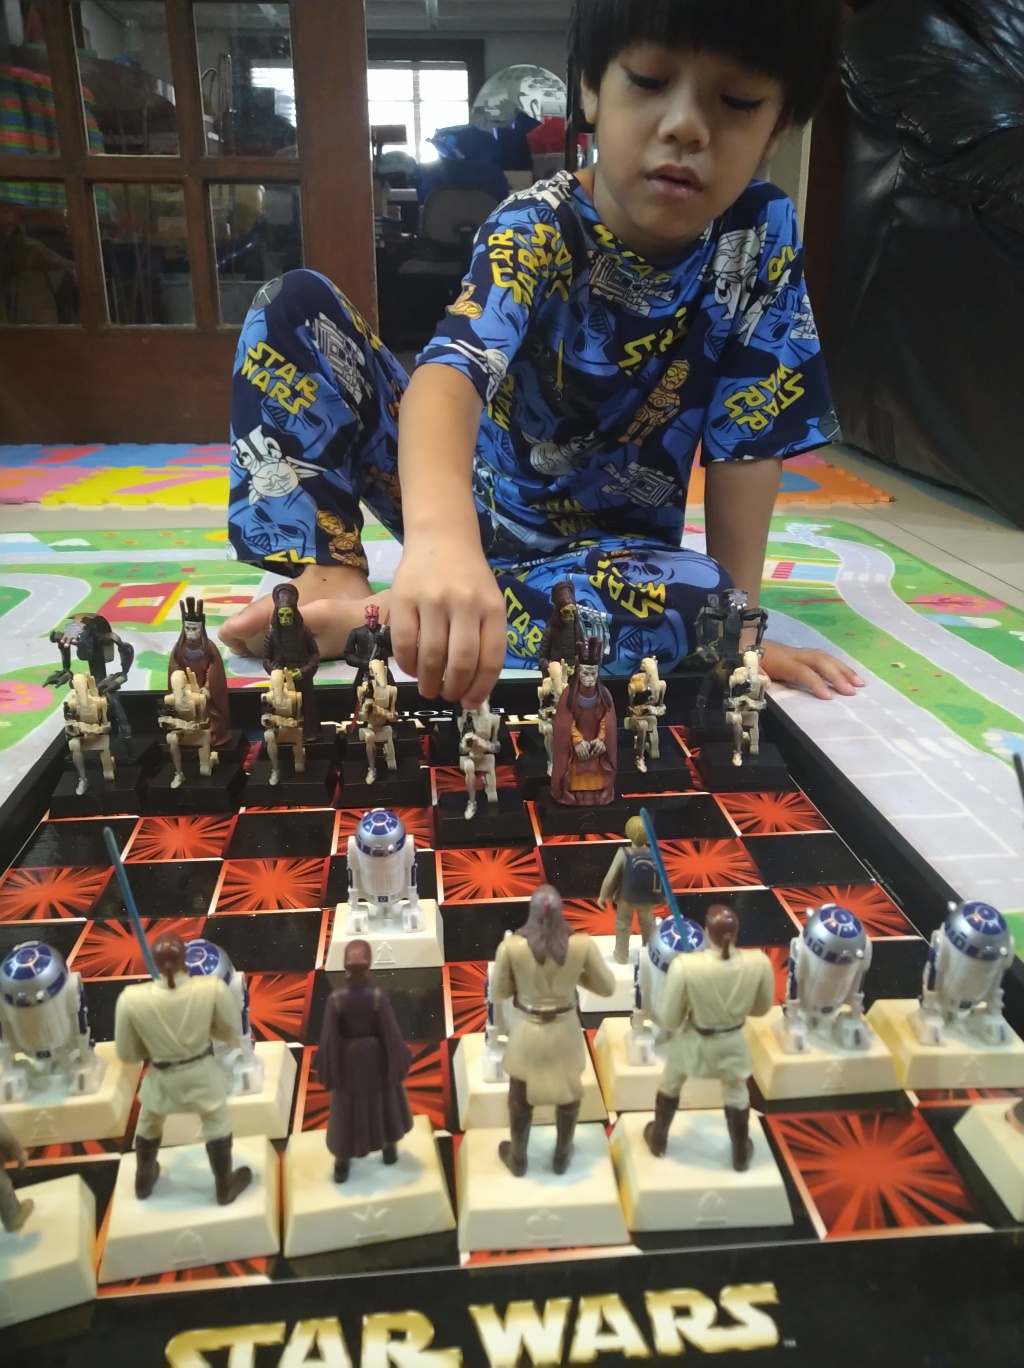 It’s a Star Wars chess kind of day